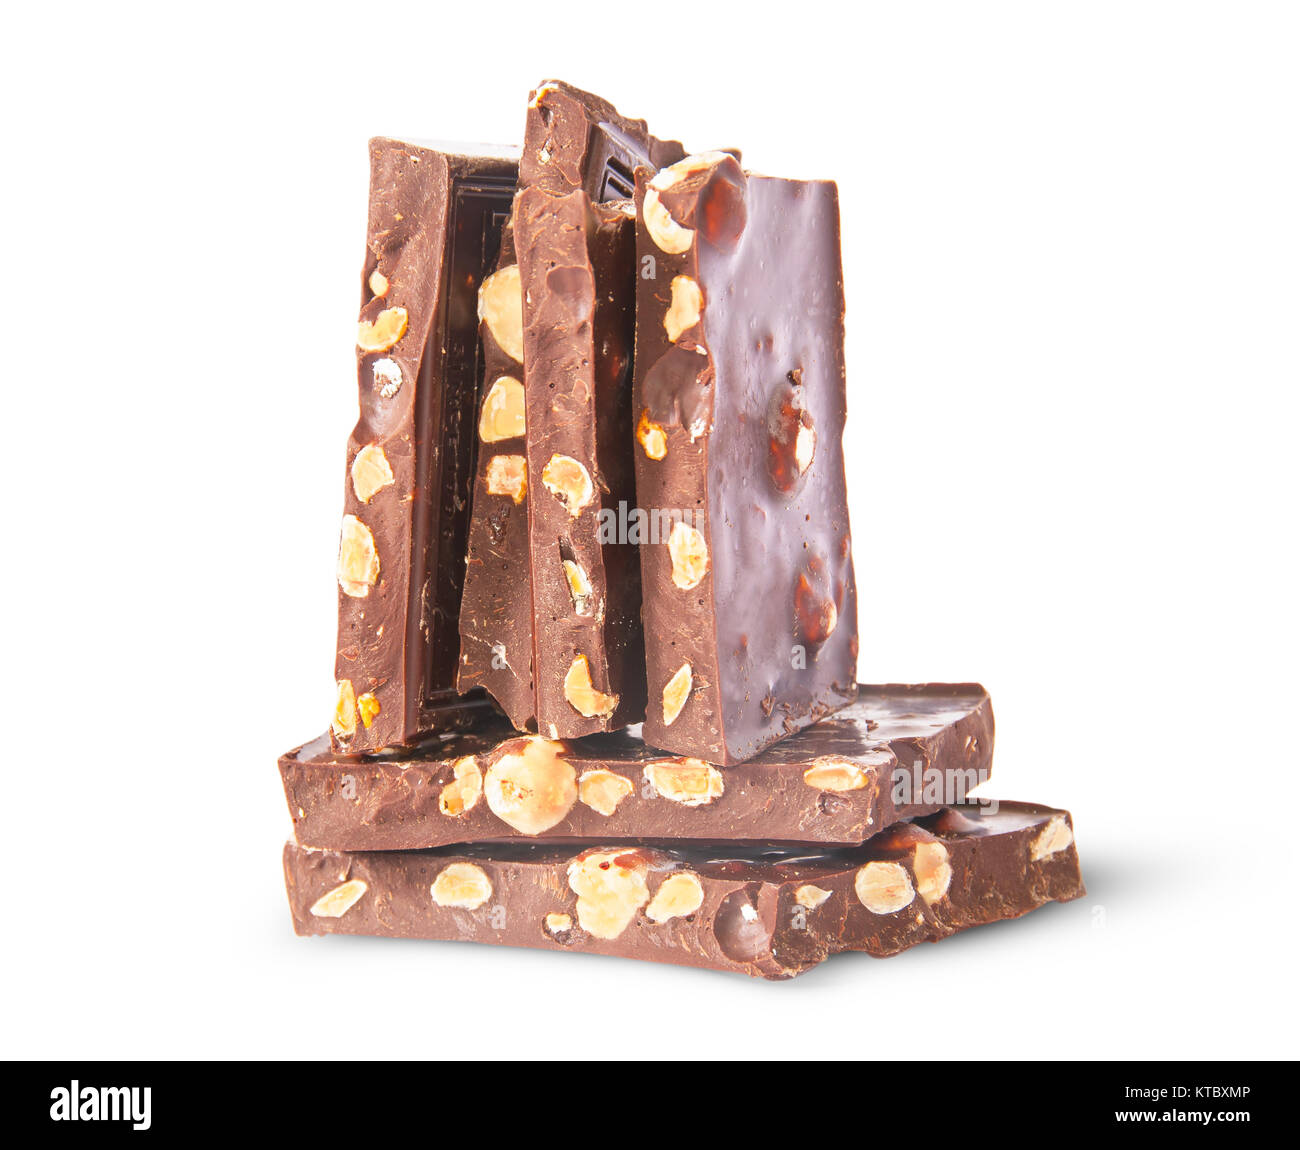 Vertical and horizontal stack of chocolate bars Stock Photo